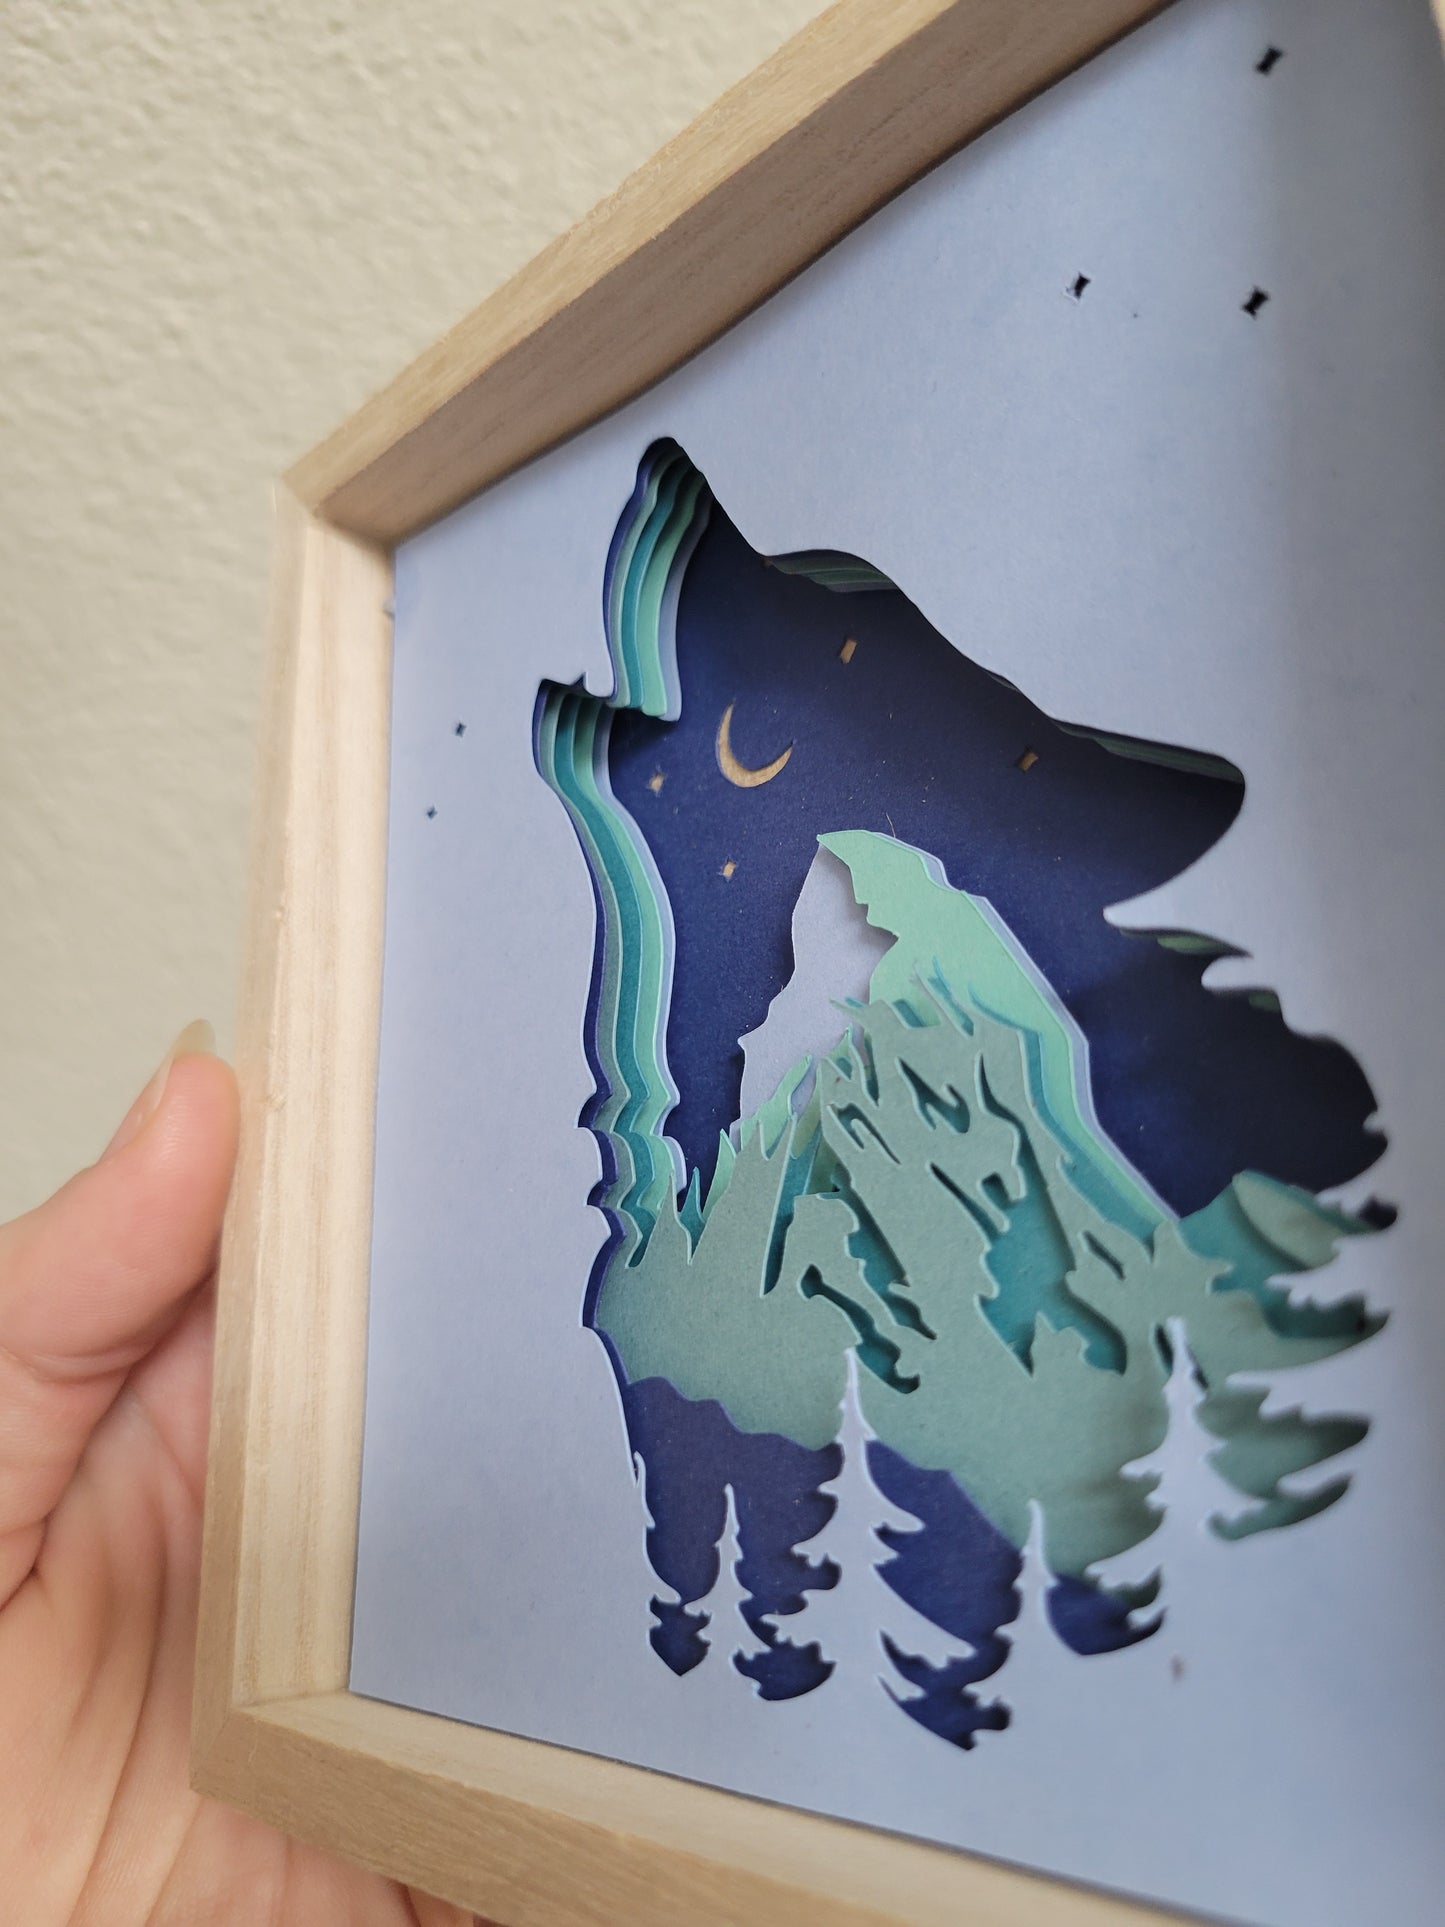 Silhouette Shadow Boxes